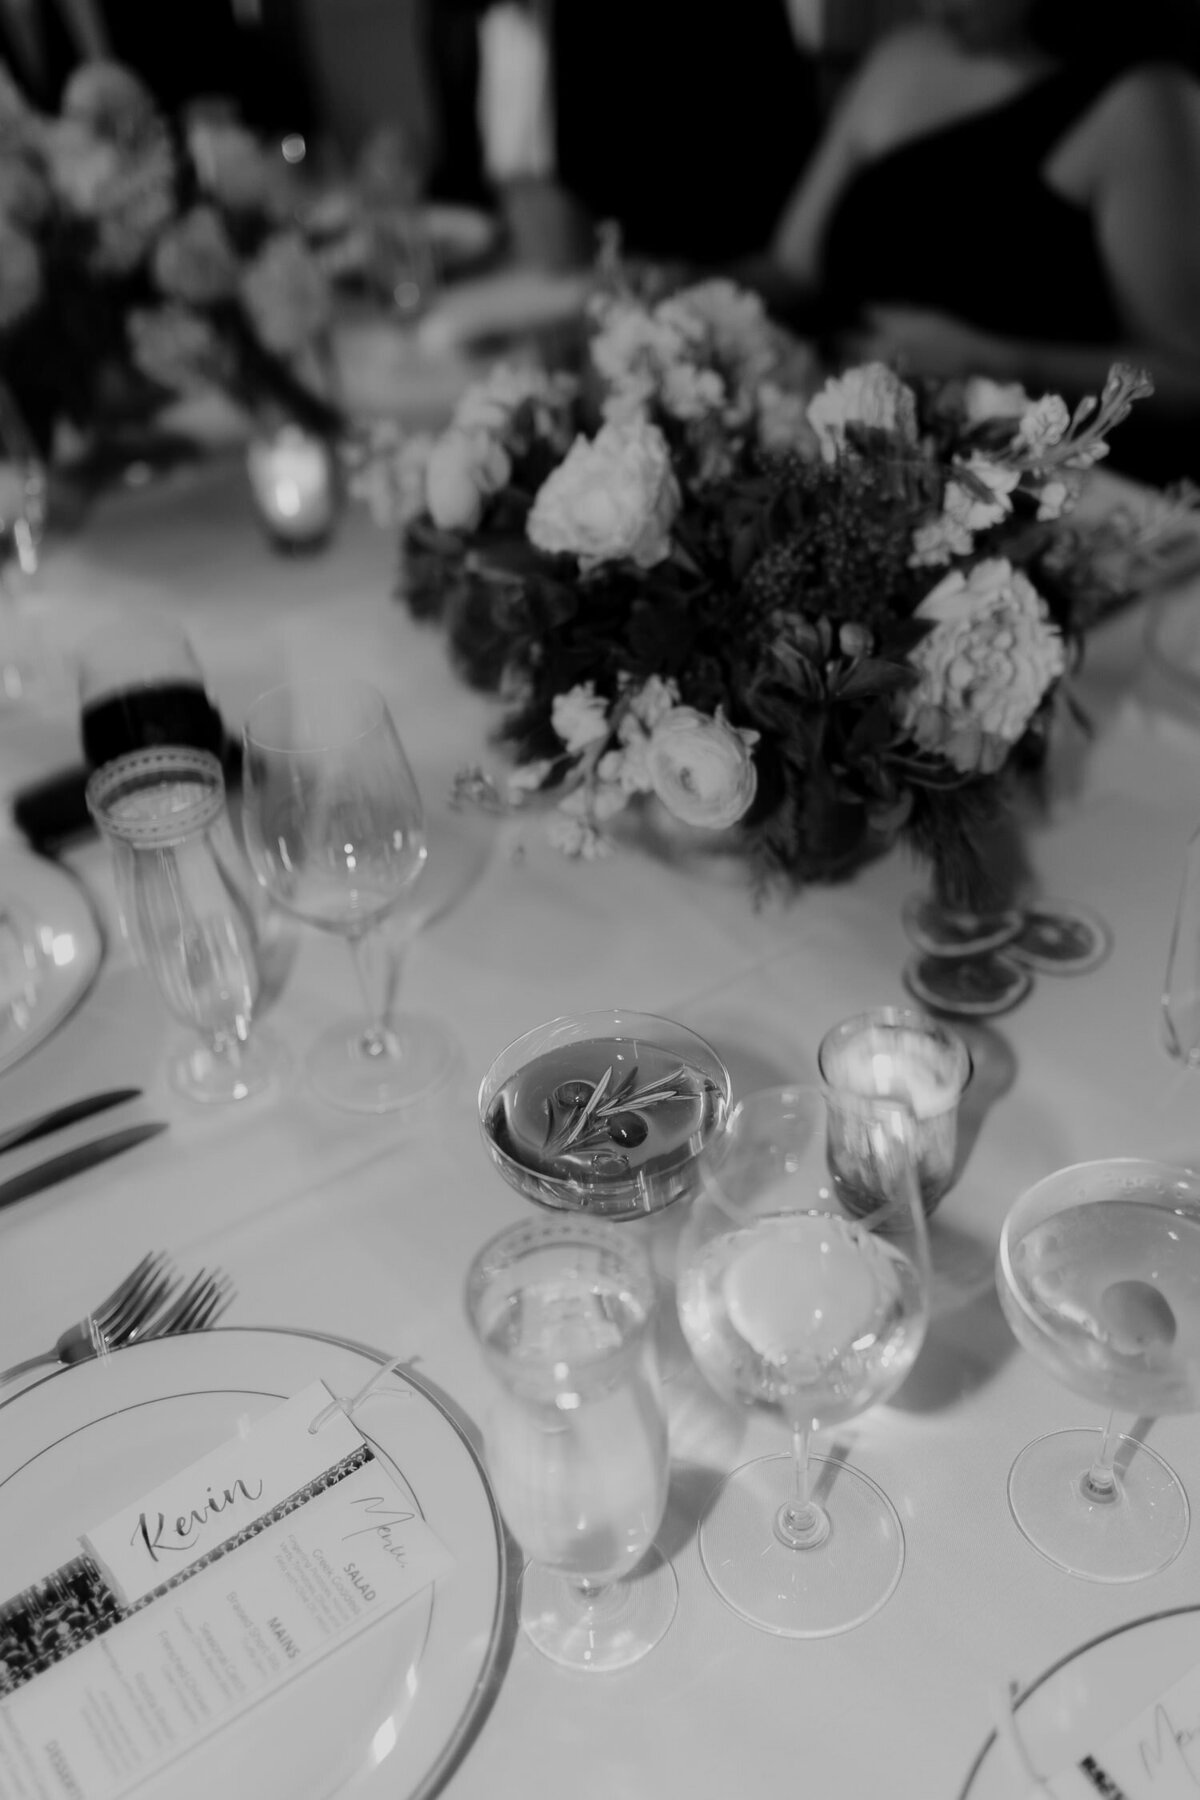 Black and white photo of wedding reception table with minimalistic flower arrangement, glasses and menu